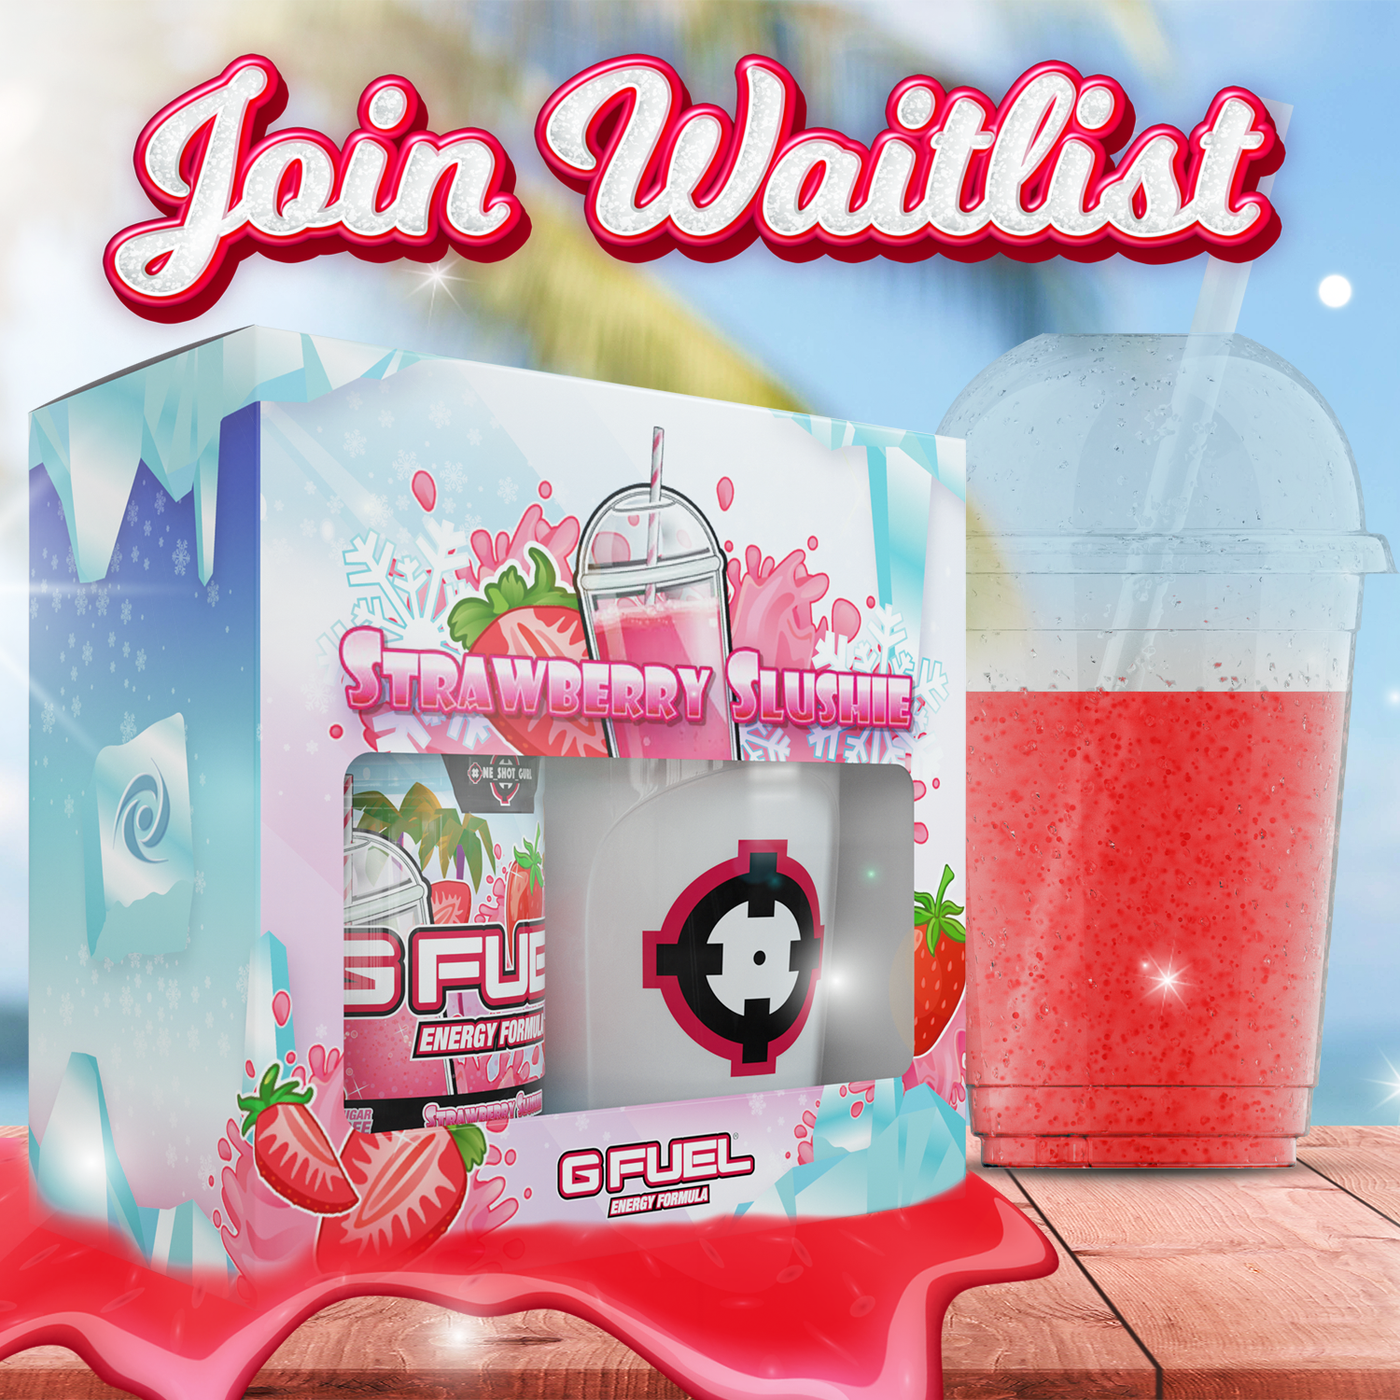 The G FUEL Strawberry Slushie Collector's Box, which includes one 40-serving Strawberry Slushie tub and one 16 oz ONE_shot_GURL 2.0 shaker cup, is inspired by ONE_shot_GURL and has candied, sweet, and refreshing flavor equal to its namesake.